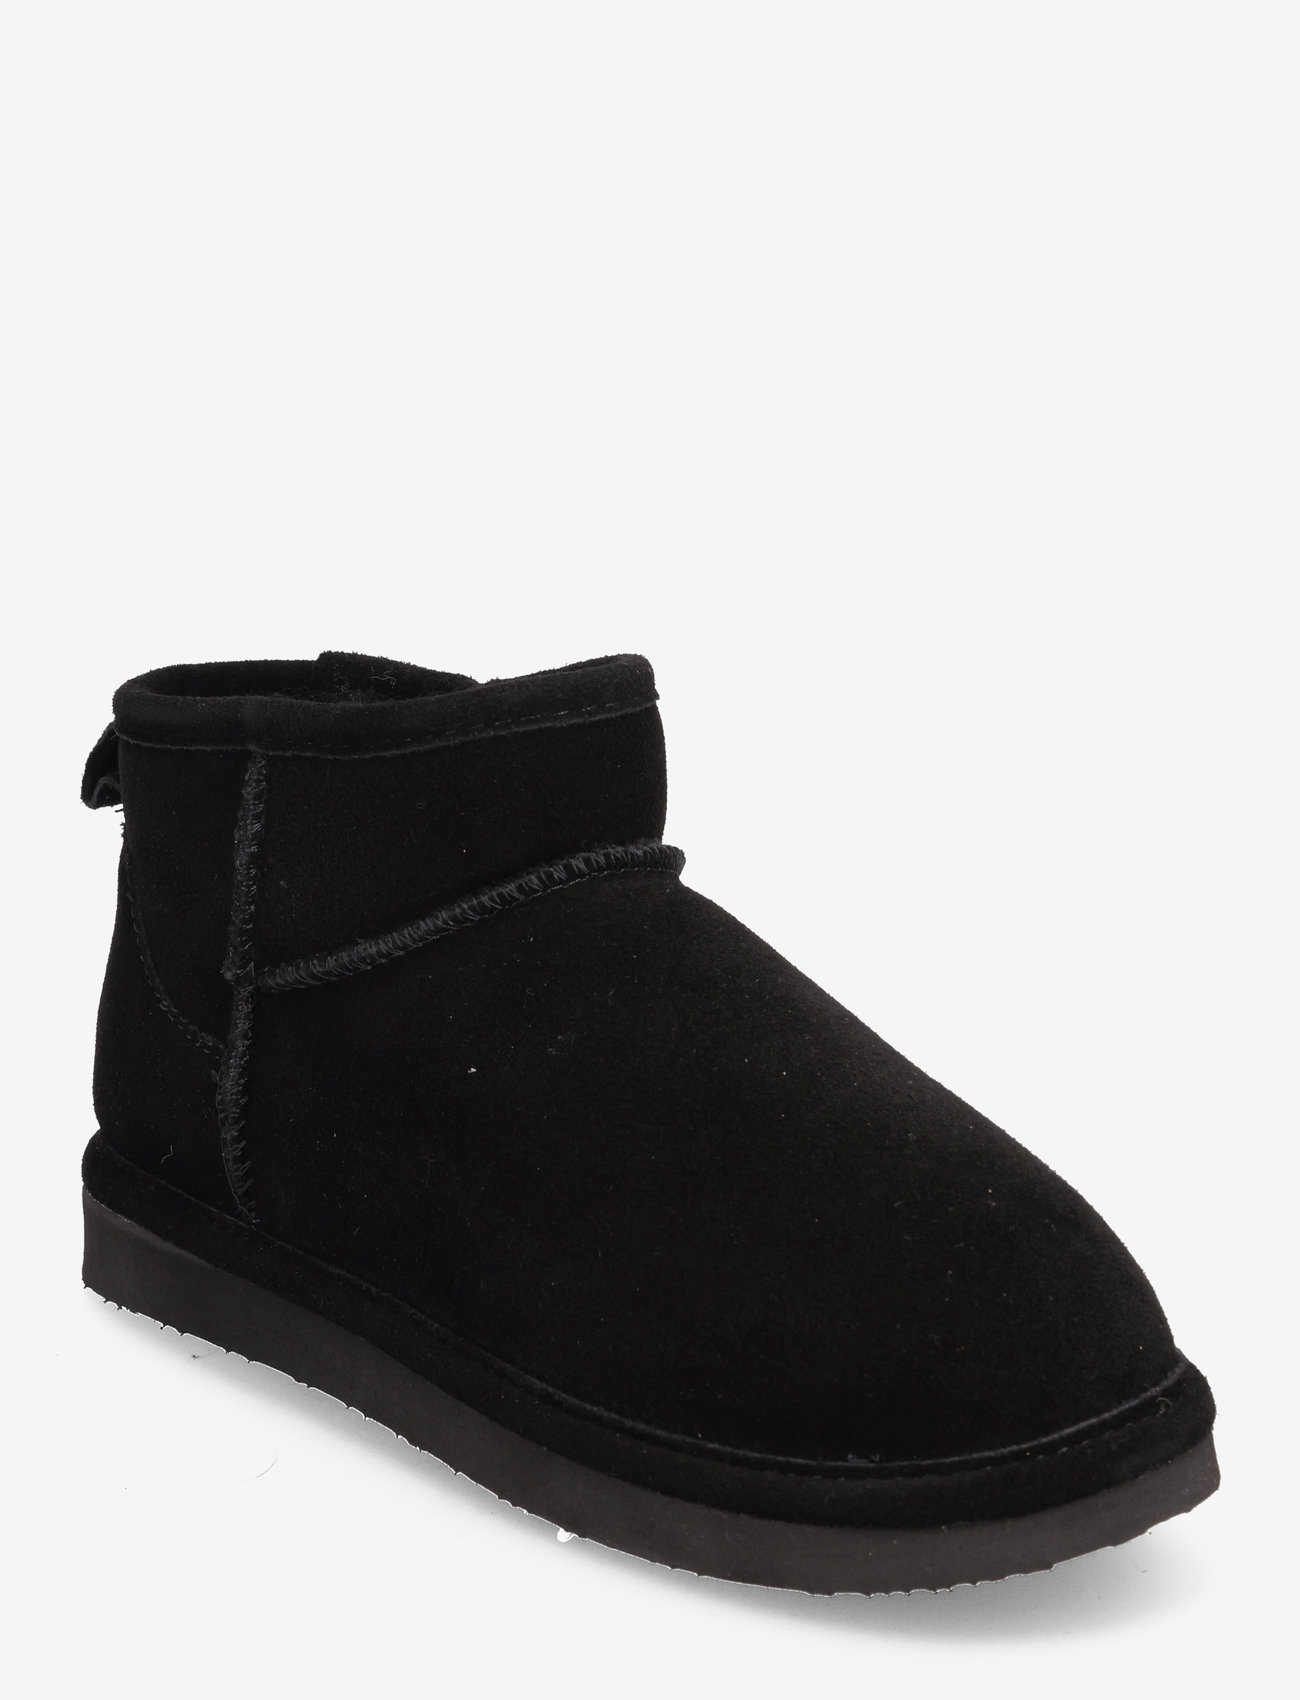 Bianco - BIASNOW Ancle Boot Suede - naised - black - 0